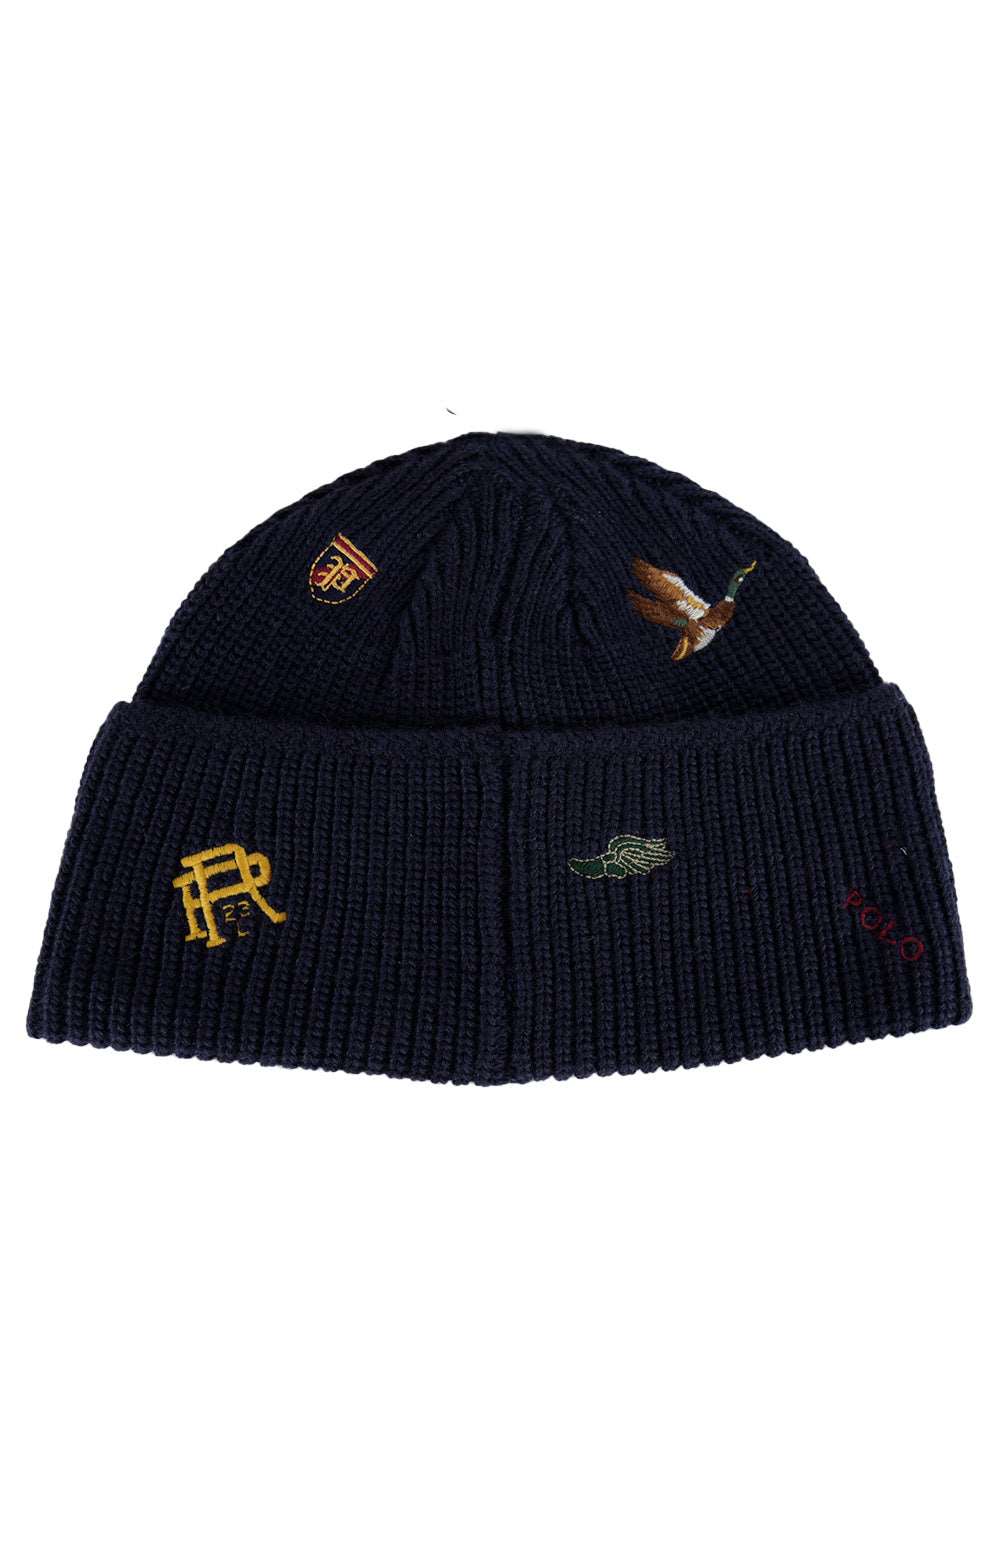 Embroidered Icons Hat - Newport Navy